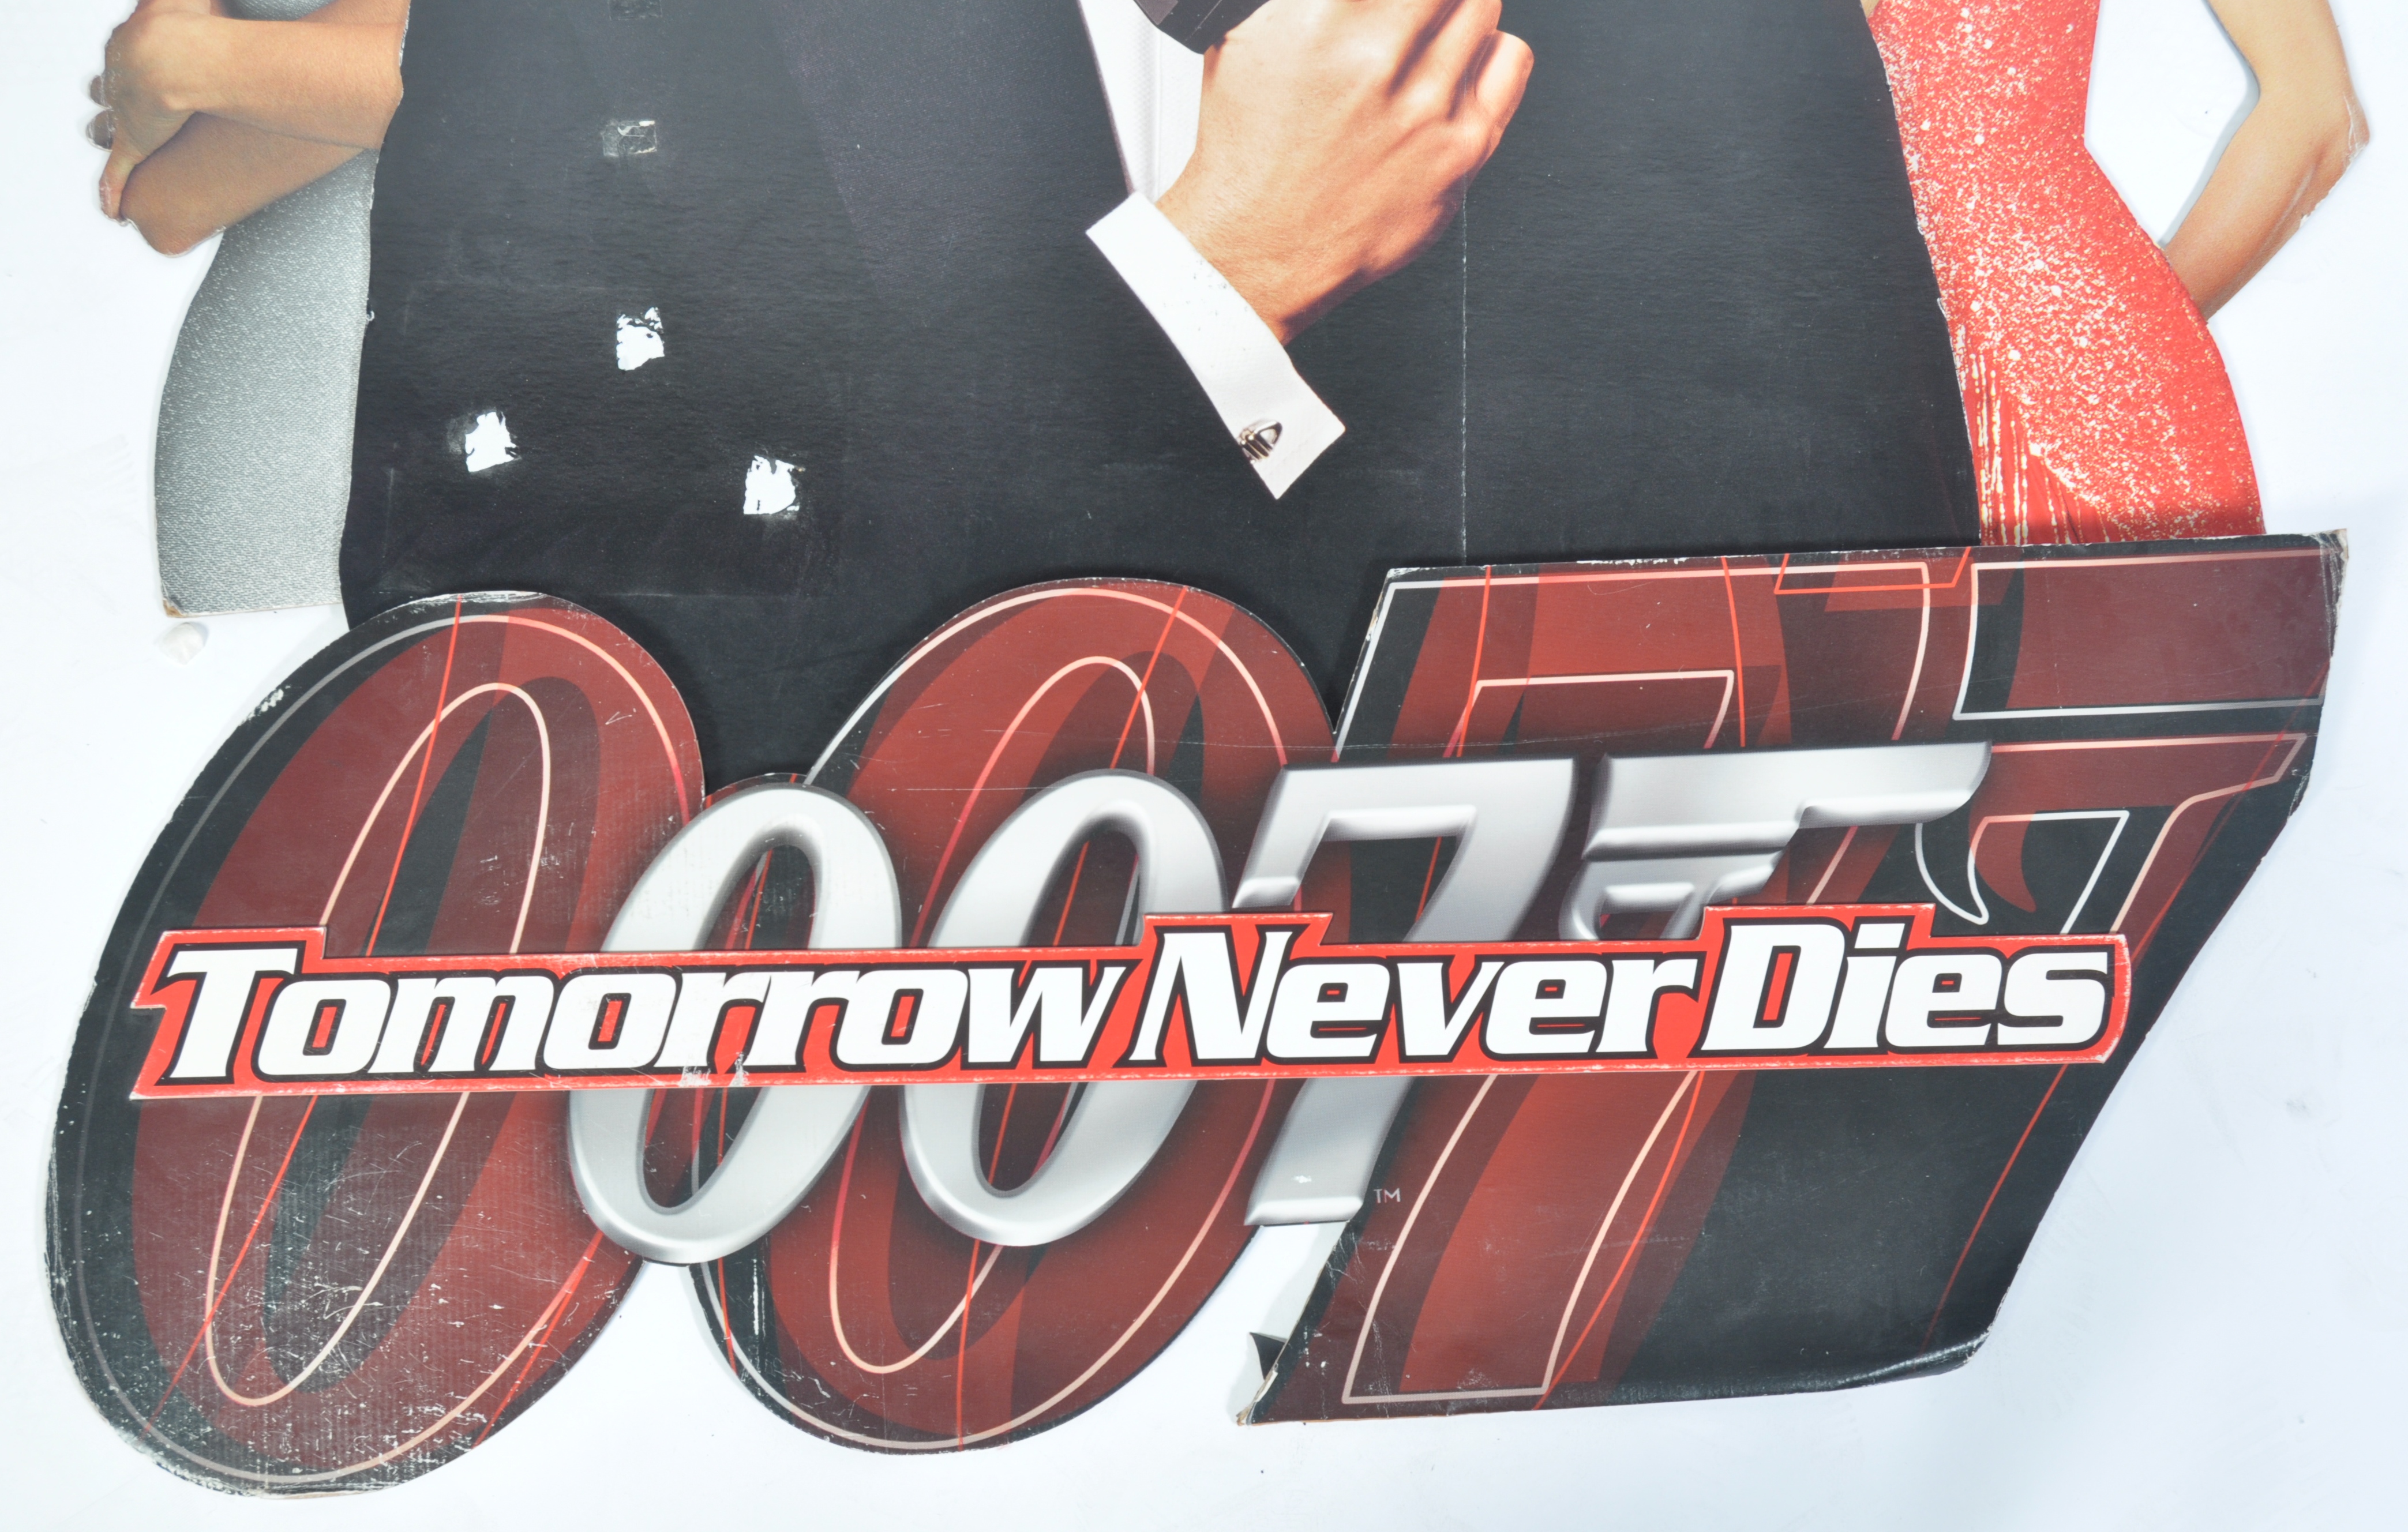 JAMES BOND TOMORROW NEVER DIES CARDBOARD CUT OUT P - Image 5 of 6